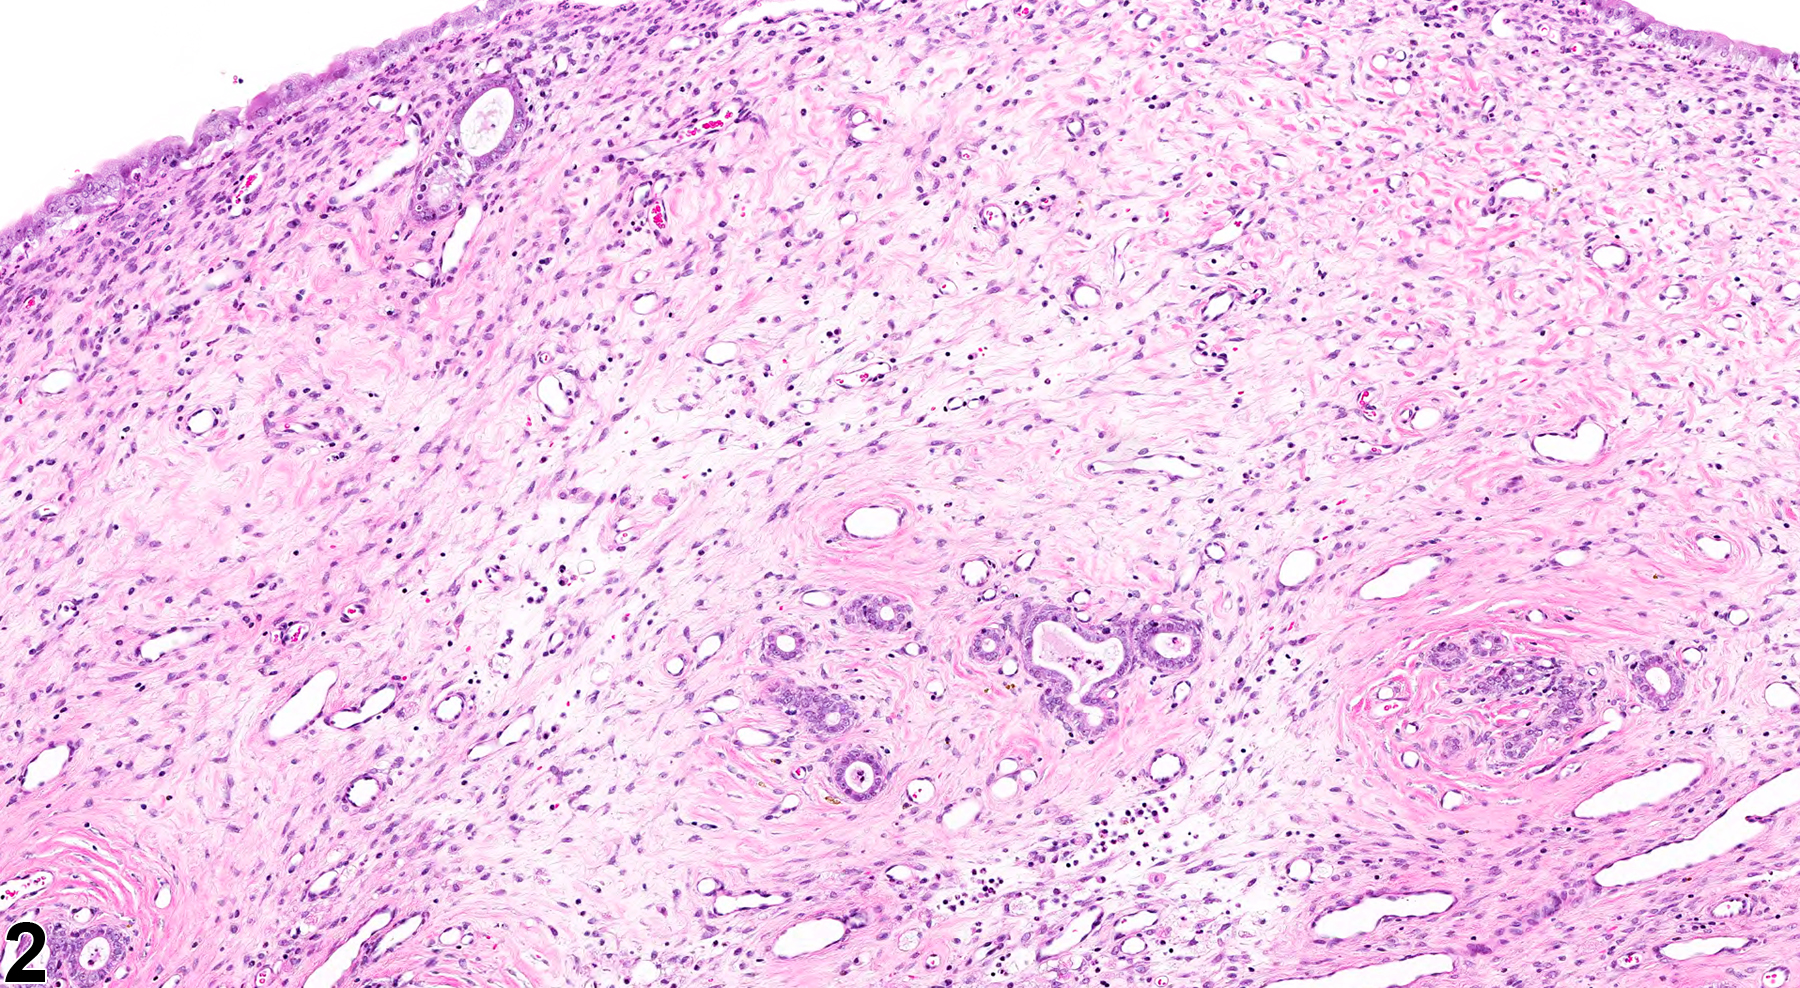 Image of edema in the uterus from a female F344/N rat in a chronic study